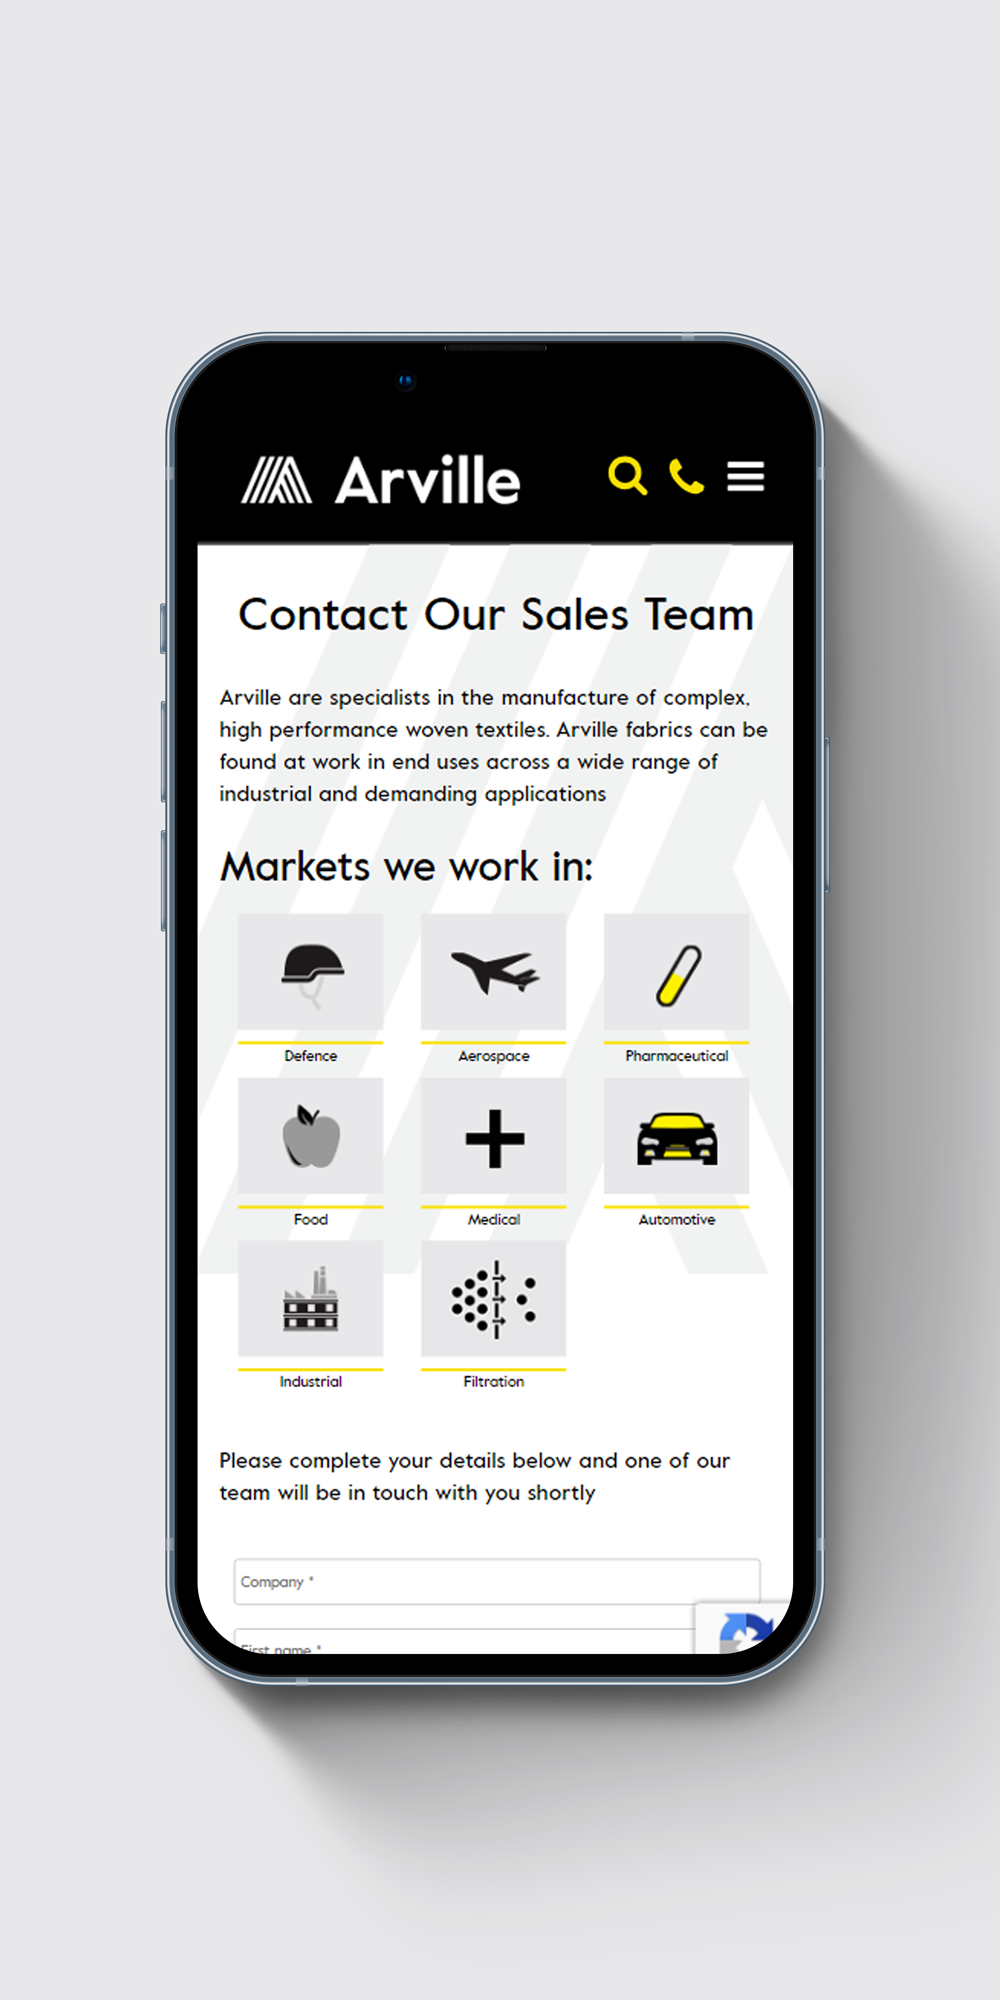 Arville contact page shown on a phone screen